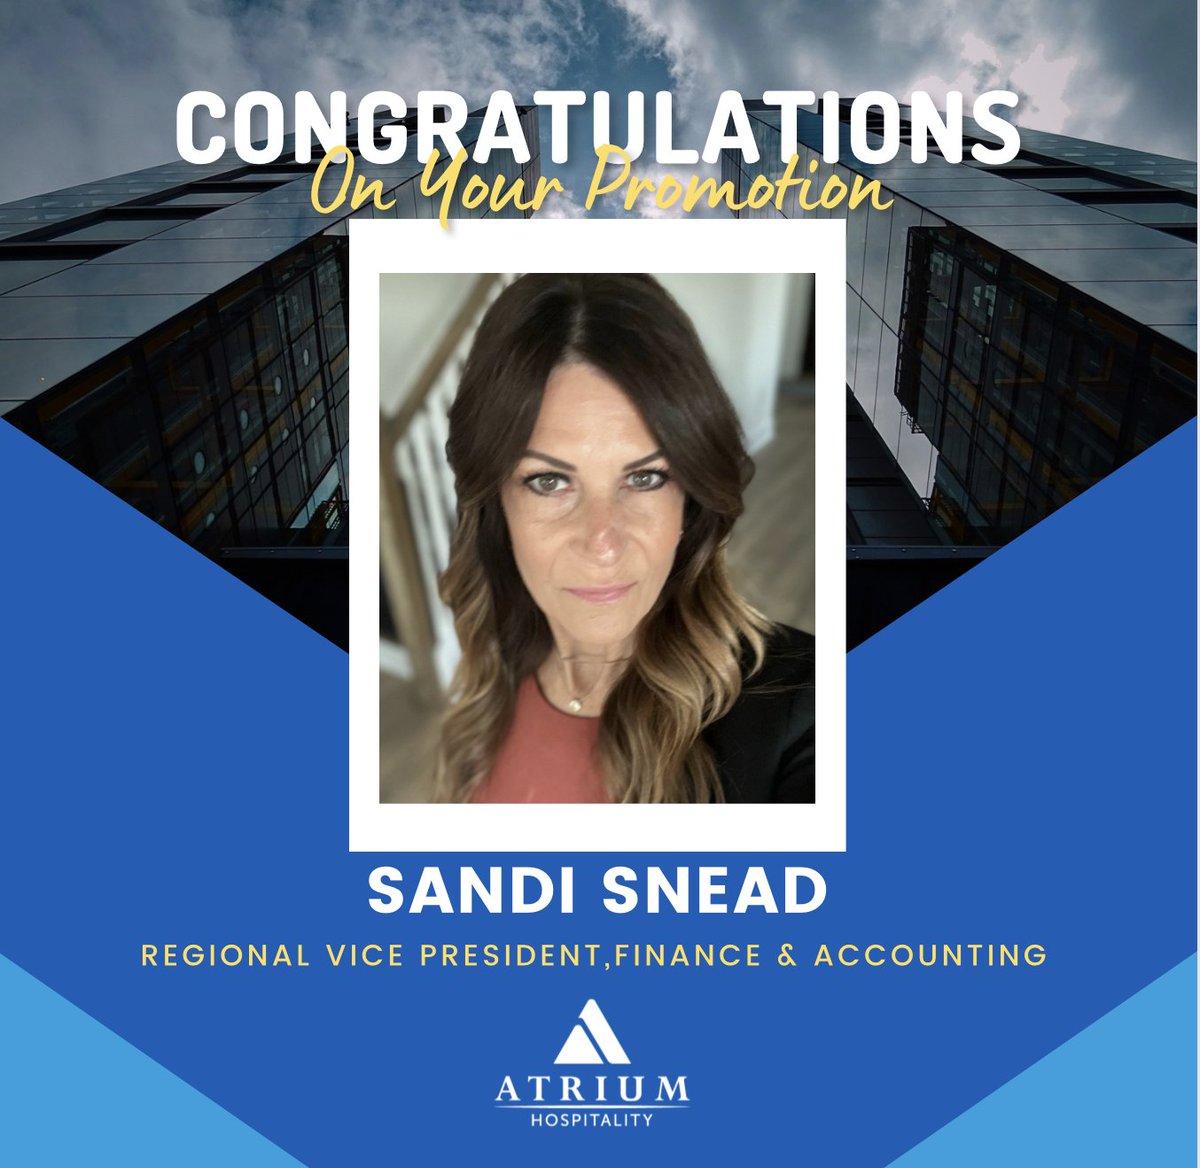 🌟 Congratulations to Sandi Snead on her well-deserved promotion to Regional Vice President, Finance & Accounting! 🎉
#Leadership #Promotion #HospitalityIndustry #Finance #Accounting #CareerGrowth #WomenInLeadership #WomenRise